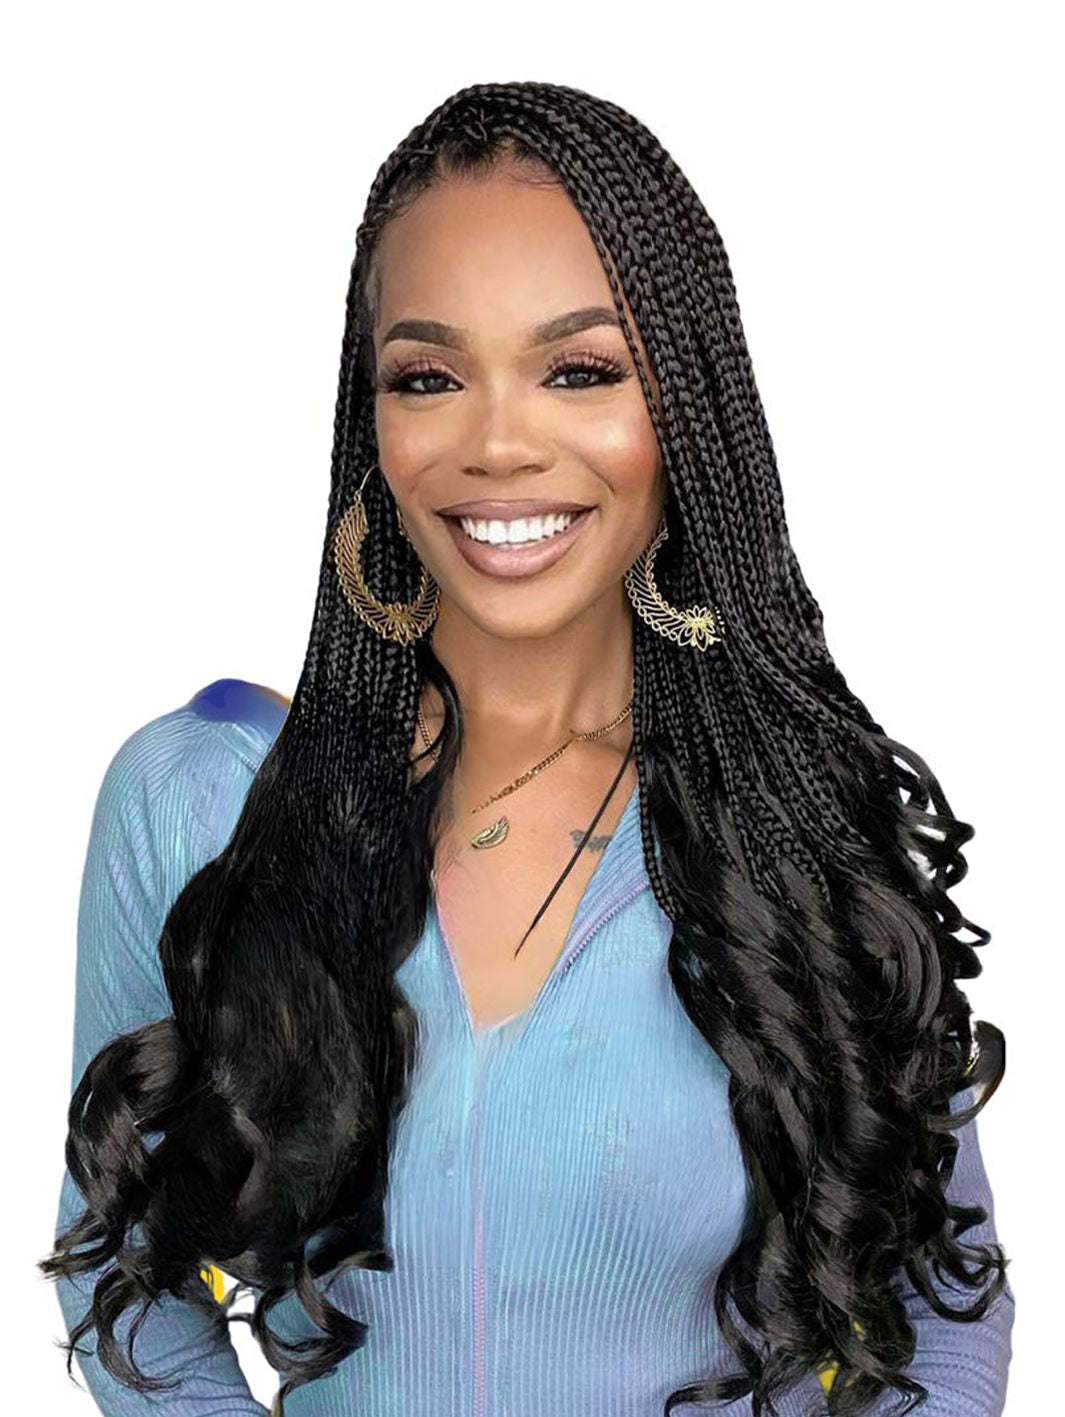 Authentic 3X French Curl Braid 22 – The Braid & Extension Besties